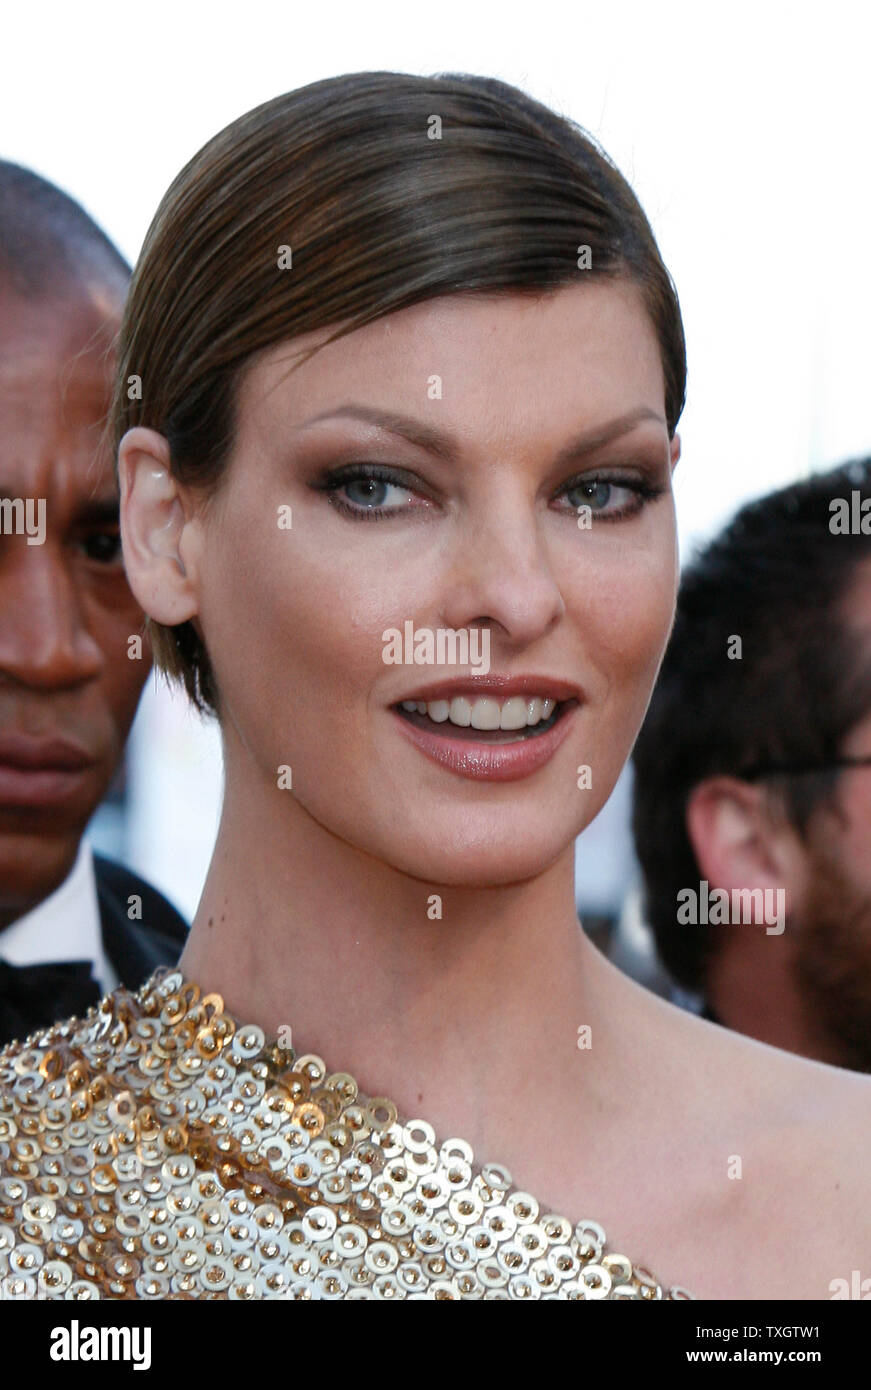 Model Linda Evangelista arrives on the red carpet before the world premiere of the film 'Indiana Jones 4: Kingdom of the Crystal Skull' during the 61st Annual Cannes Film Festival in Cannes, France on May 18, 2008.   (UPI Photo/David Silpa) Stock Photo